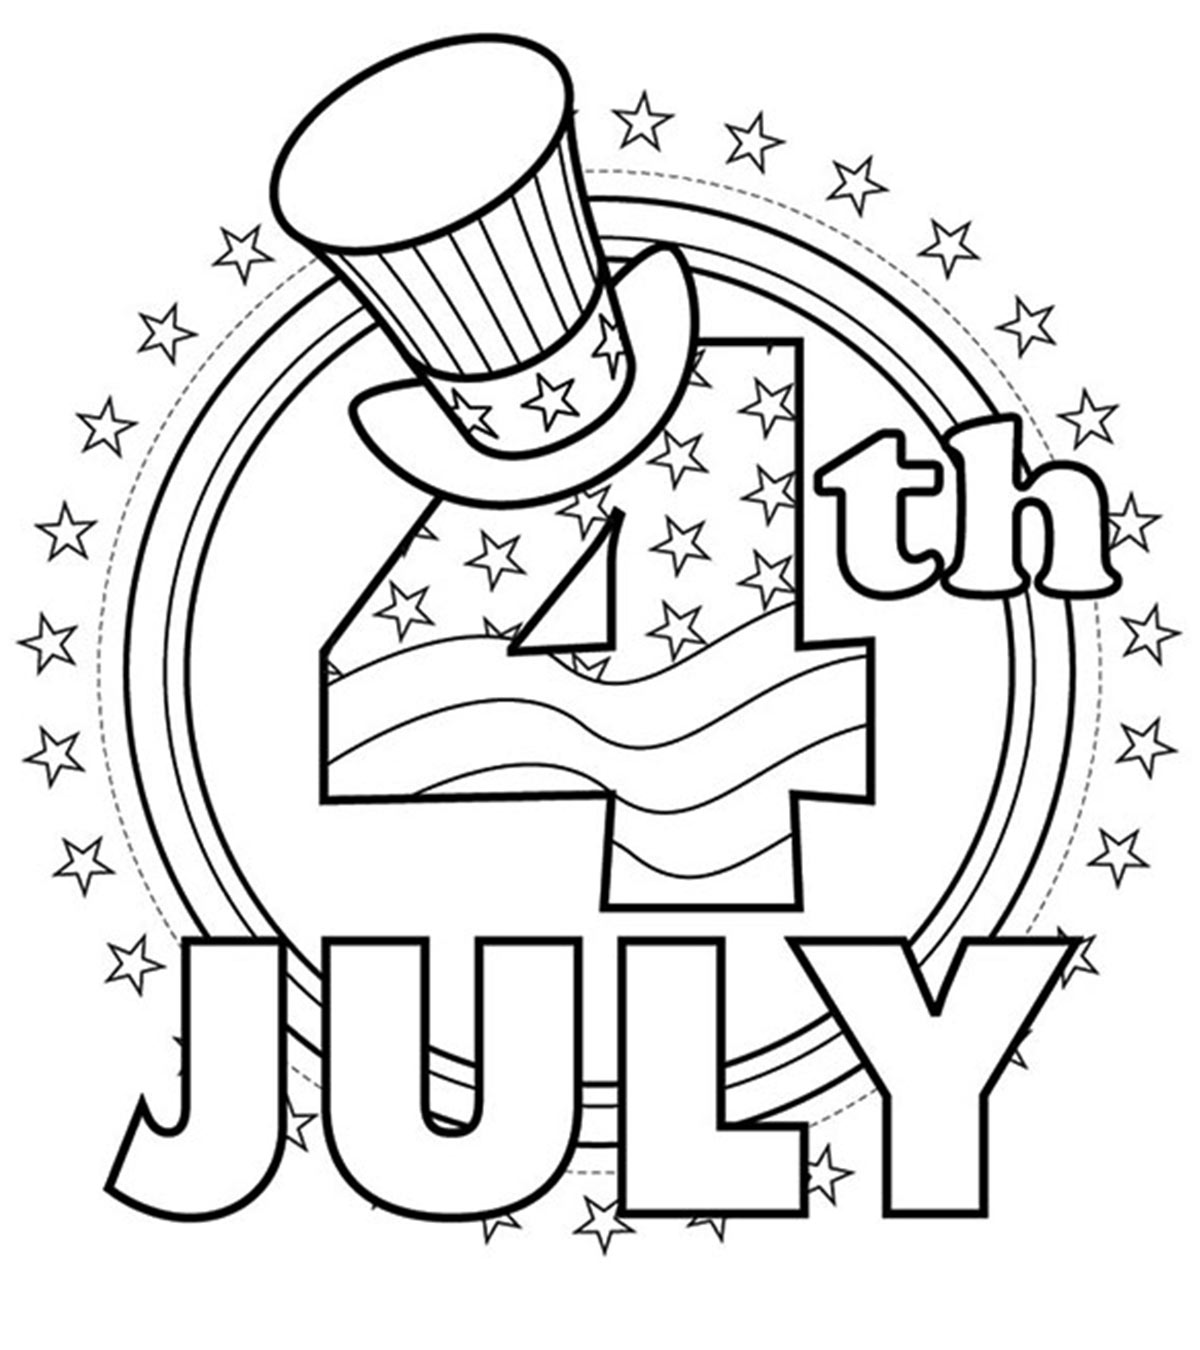 July 4Th Coloring Pages Printable / 4 Patriotic Free Printable 4th Of July Coloring Pages This Tiny Blue House